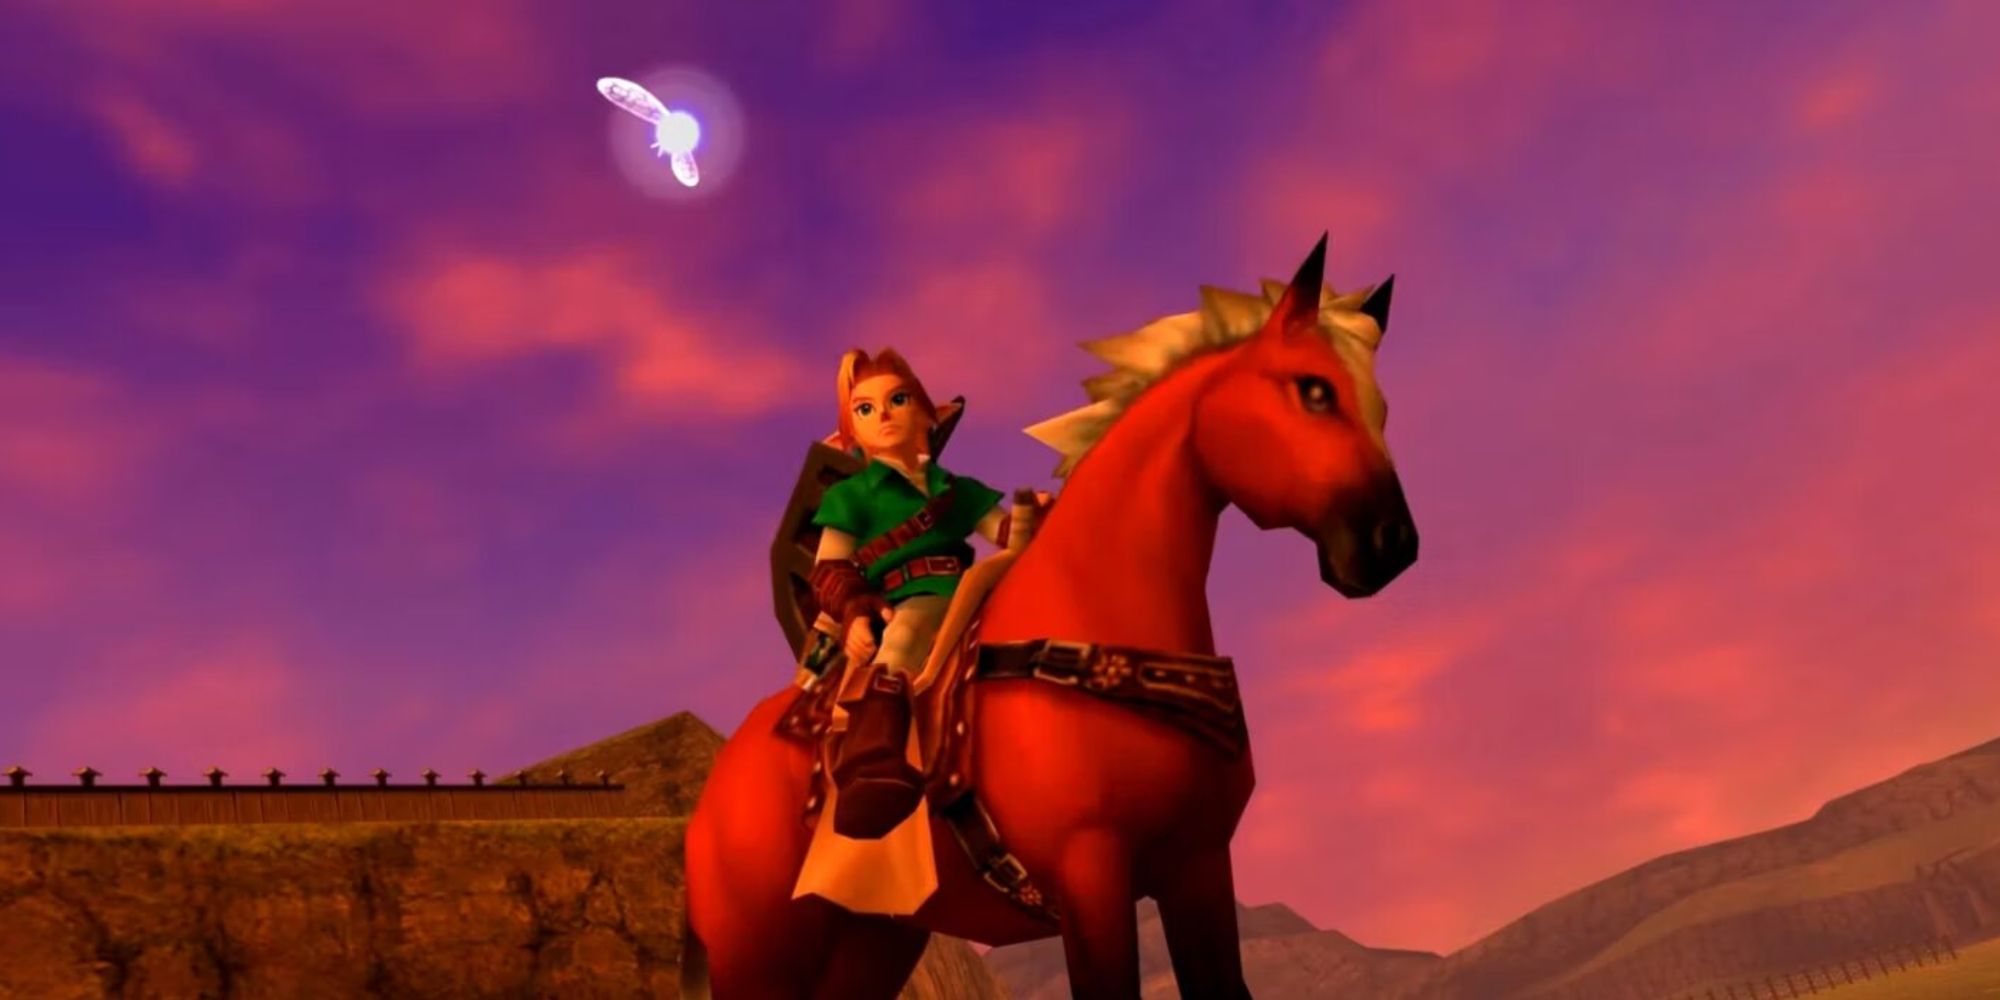 Connect with Navi on Epona's back in The Legend of Zelda Ocarina of Time